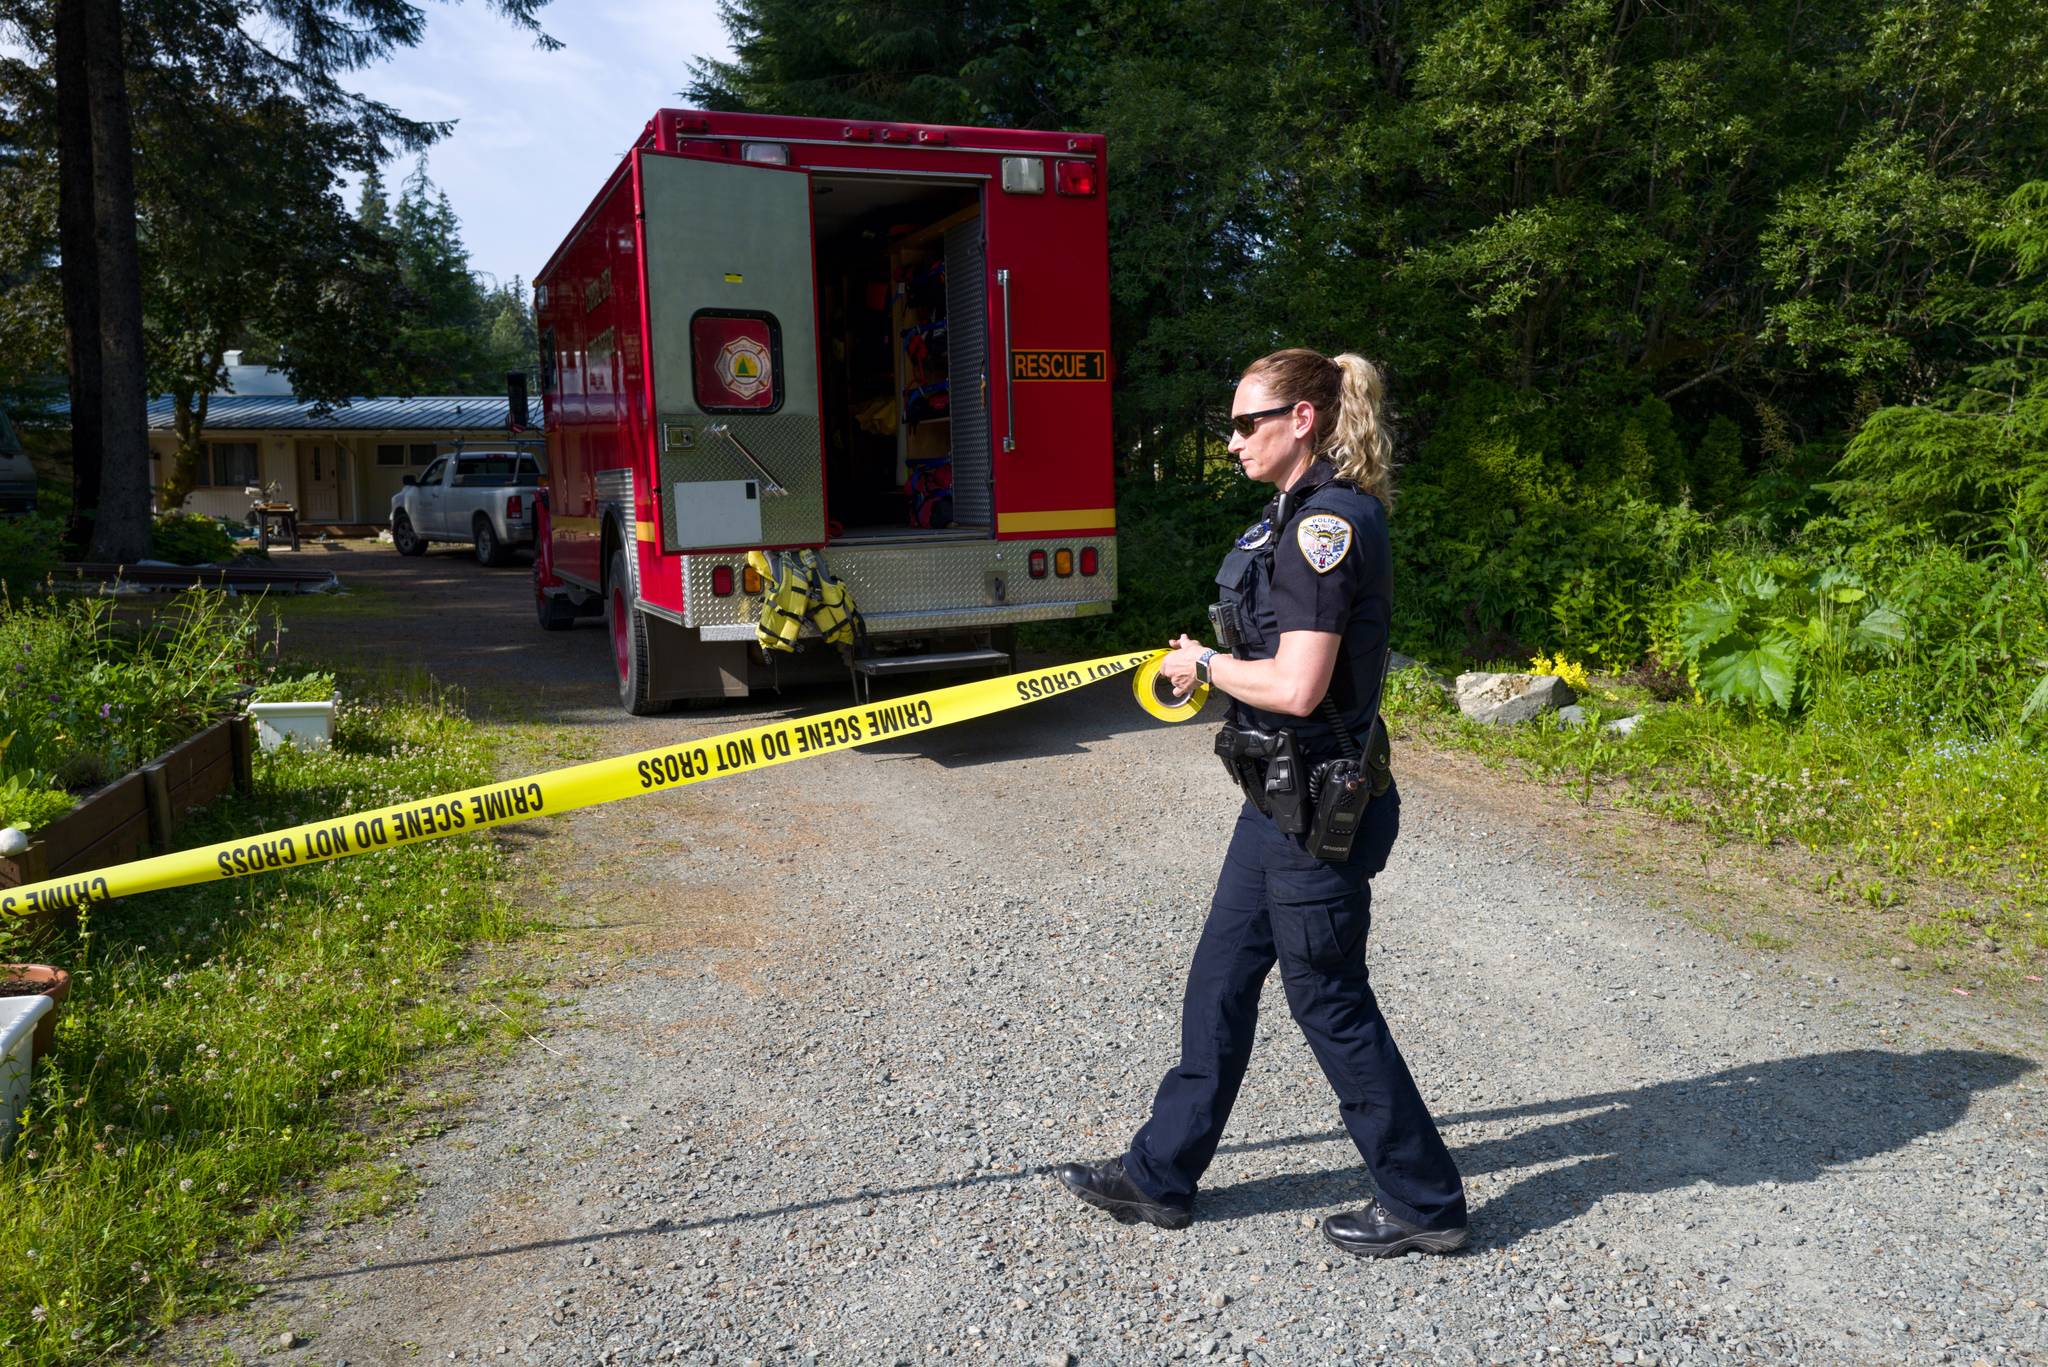 JPD Officer Mattie Shriver put up police tape at 9010 Atlin on Wednesday, July 3, 2019. A body was reportedly found in a pond behind the house. (Michael Penn | Juneau Empire)